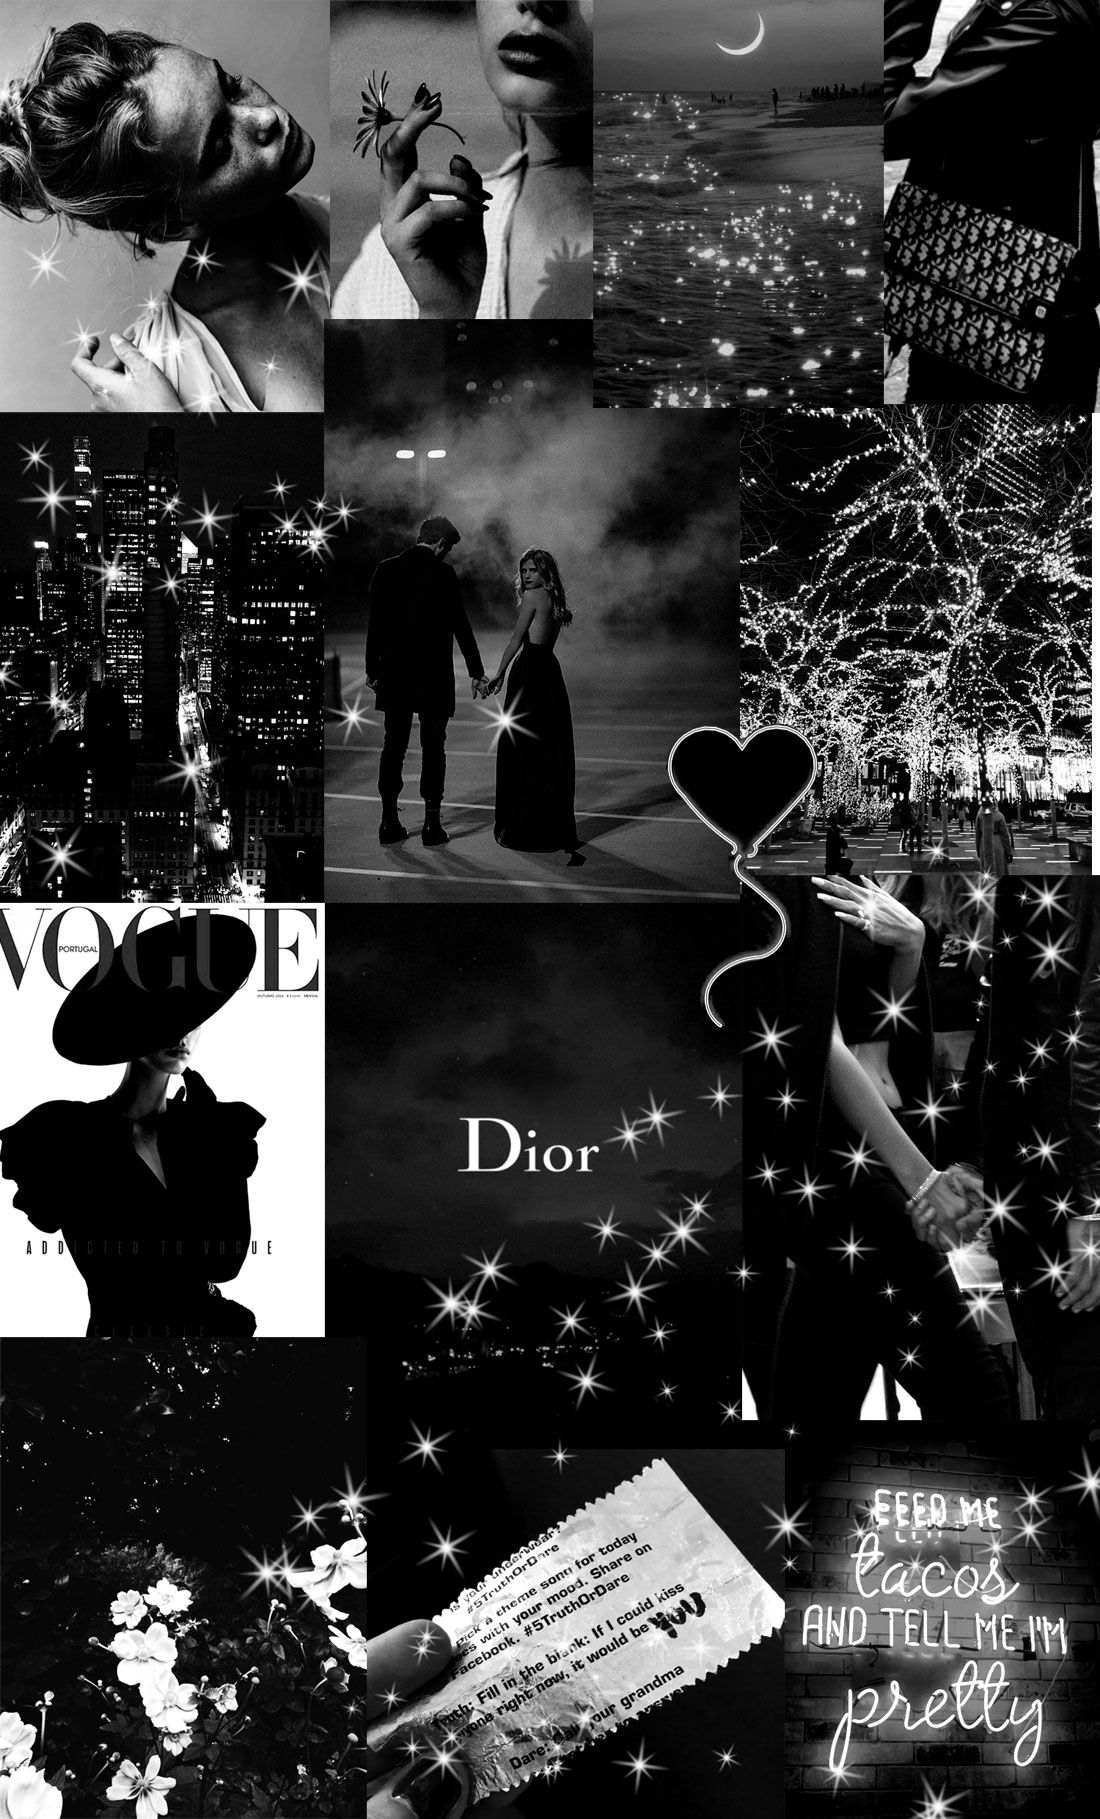 Aesthetic black and white collage - Wedding, Dior, black, collage